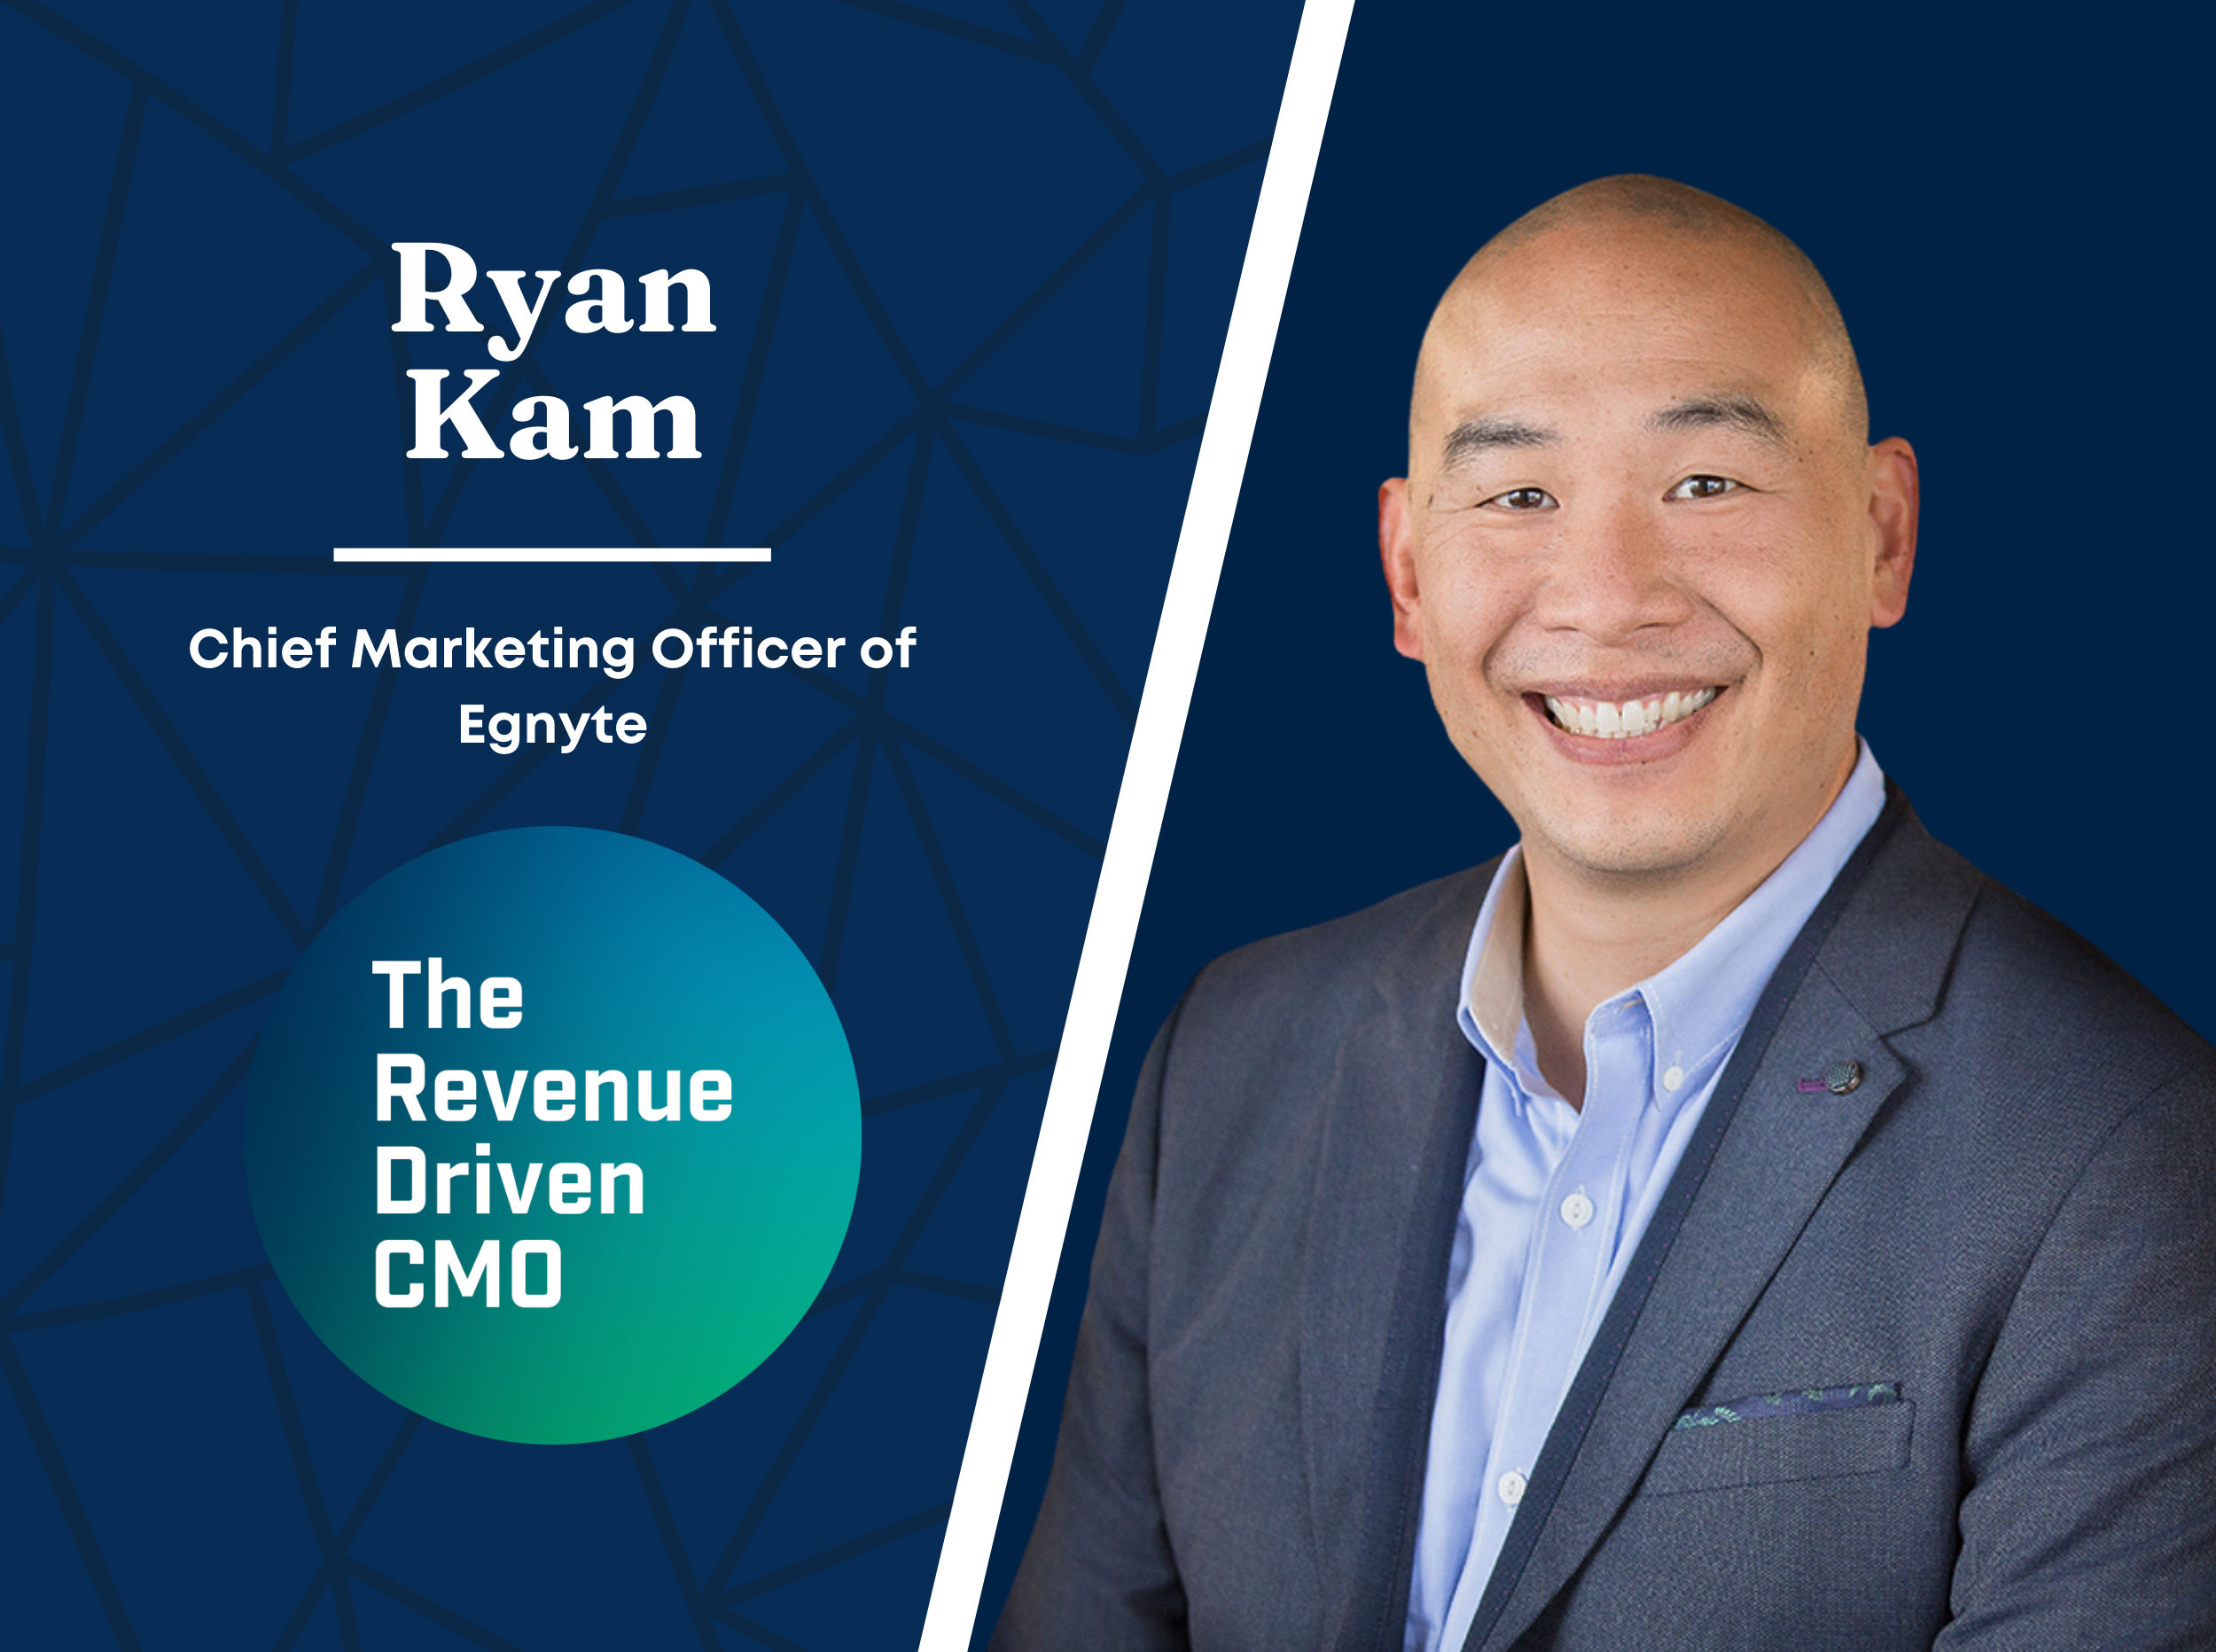 Using Calculated Creativity to Drive Growth with Ryan Kam